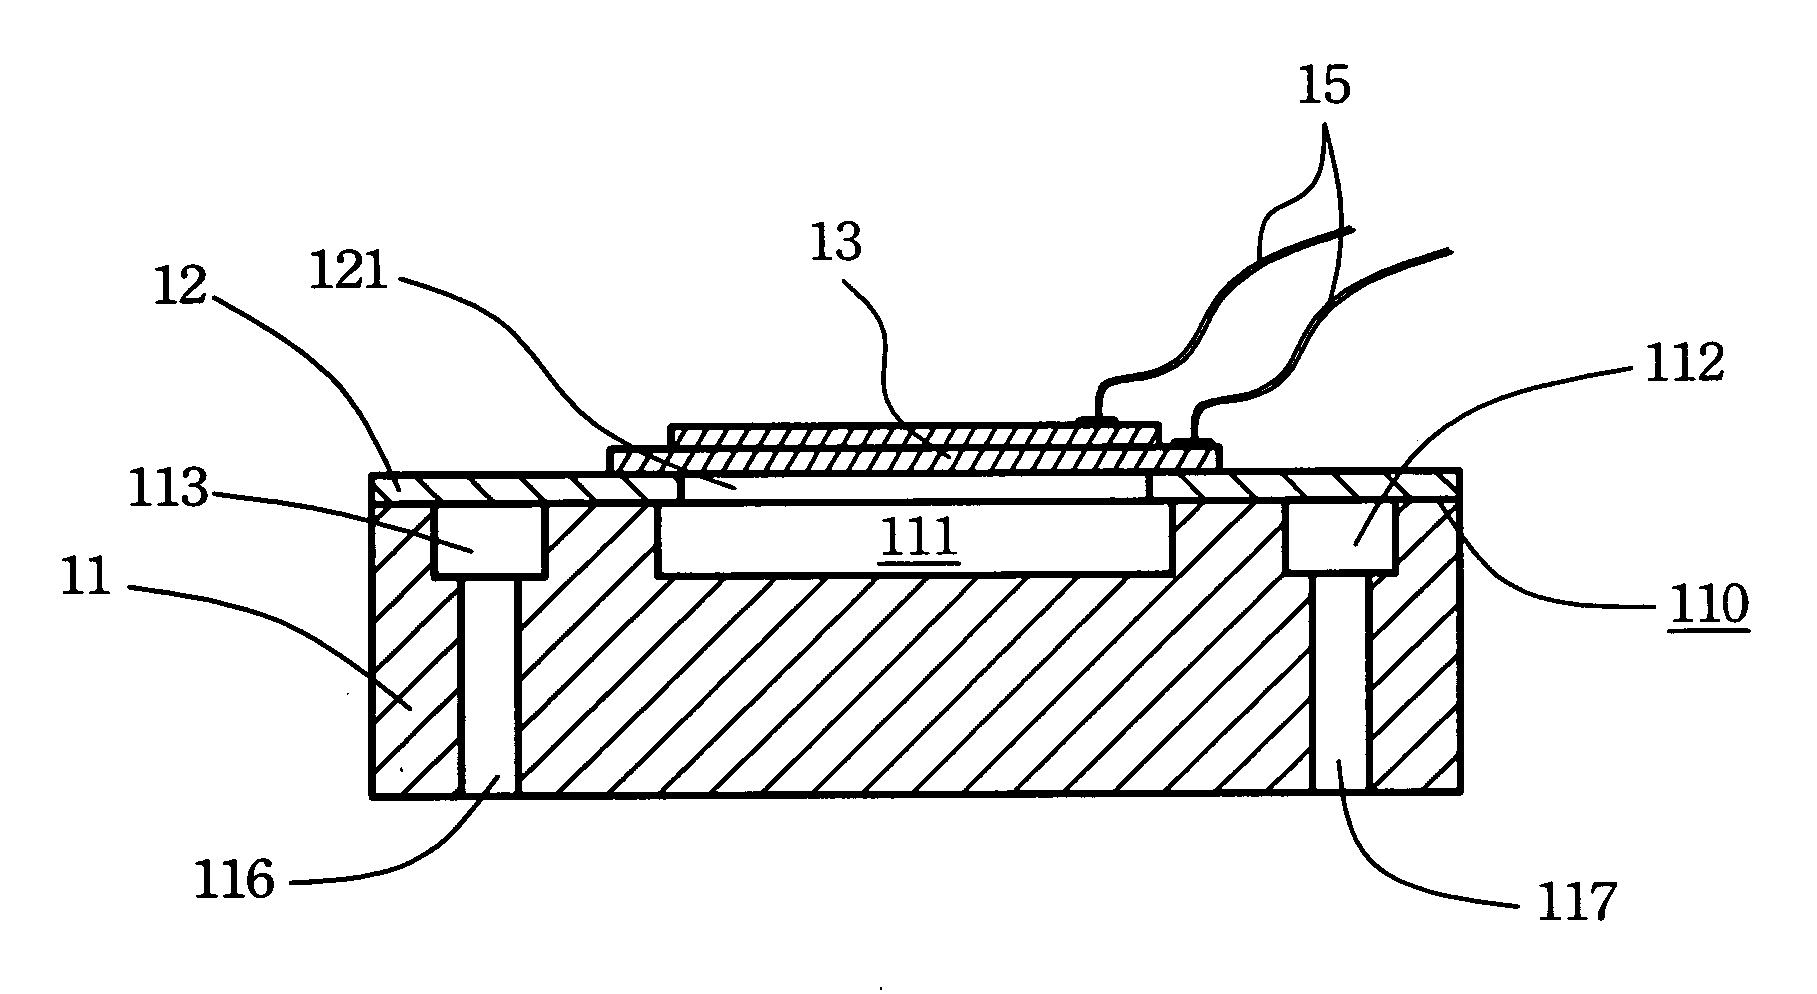 PDMS valve-less micro pump structure and method for producing the same